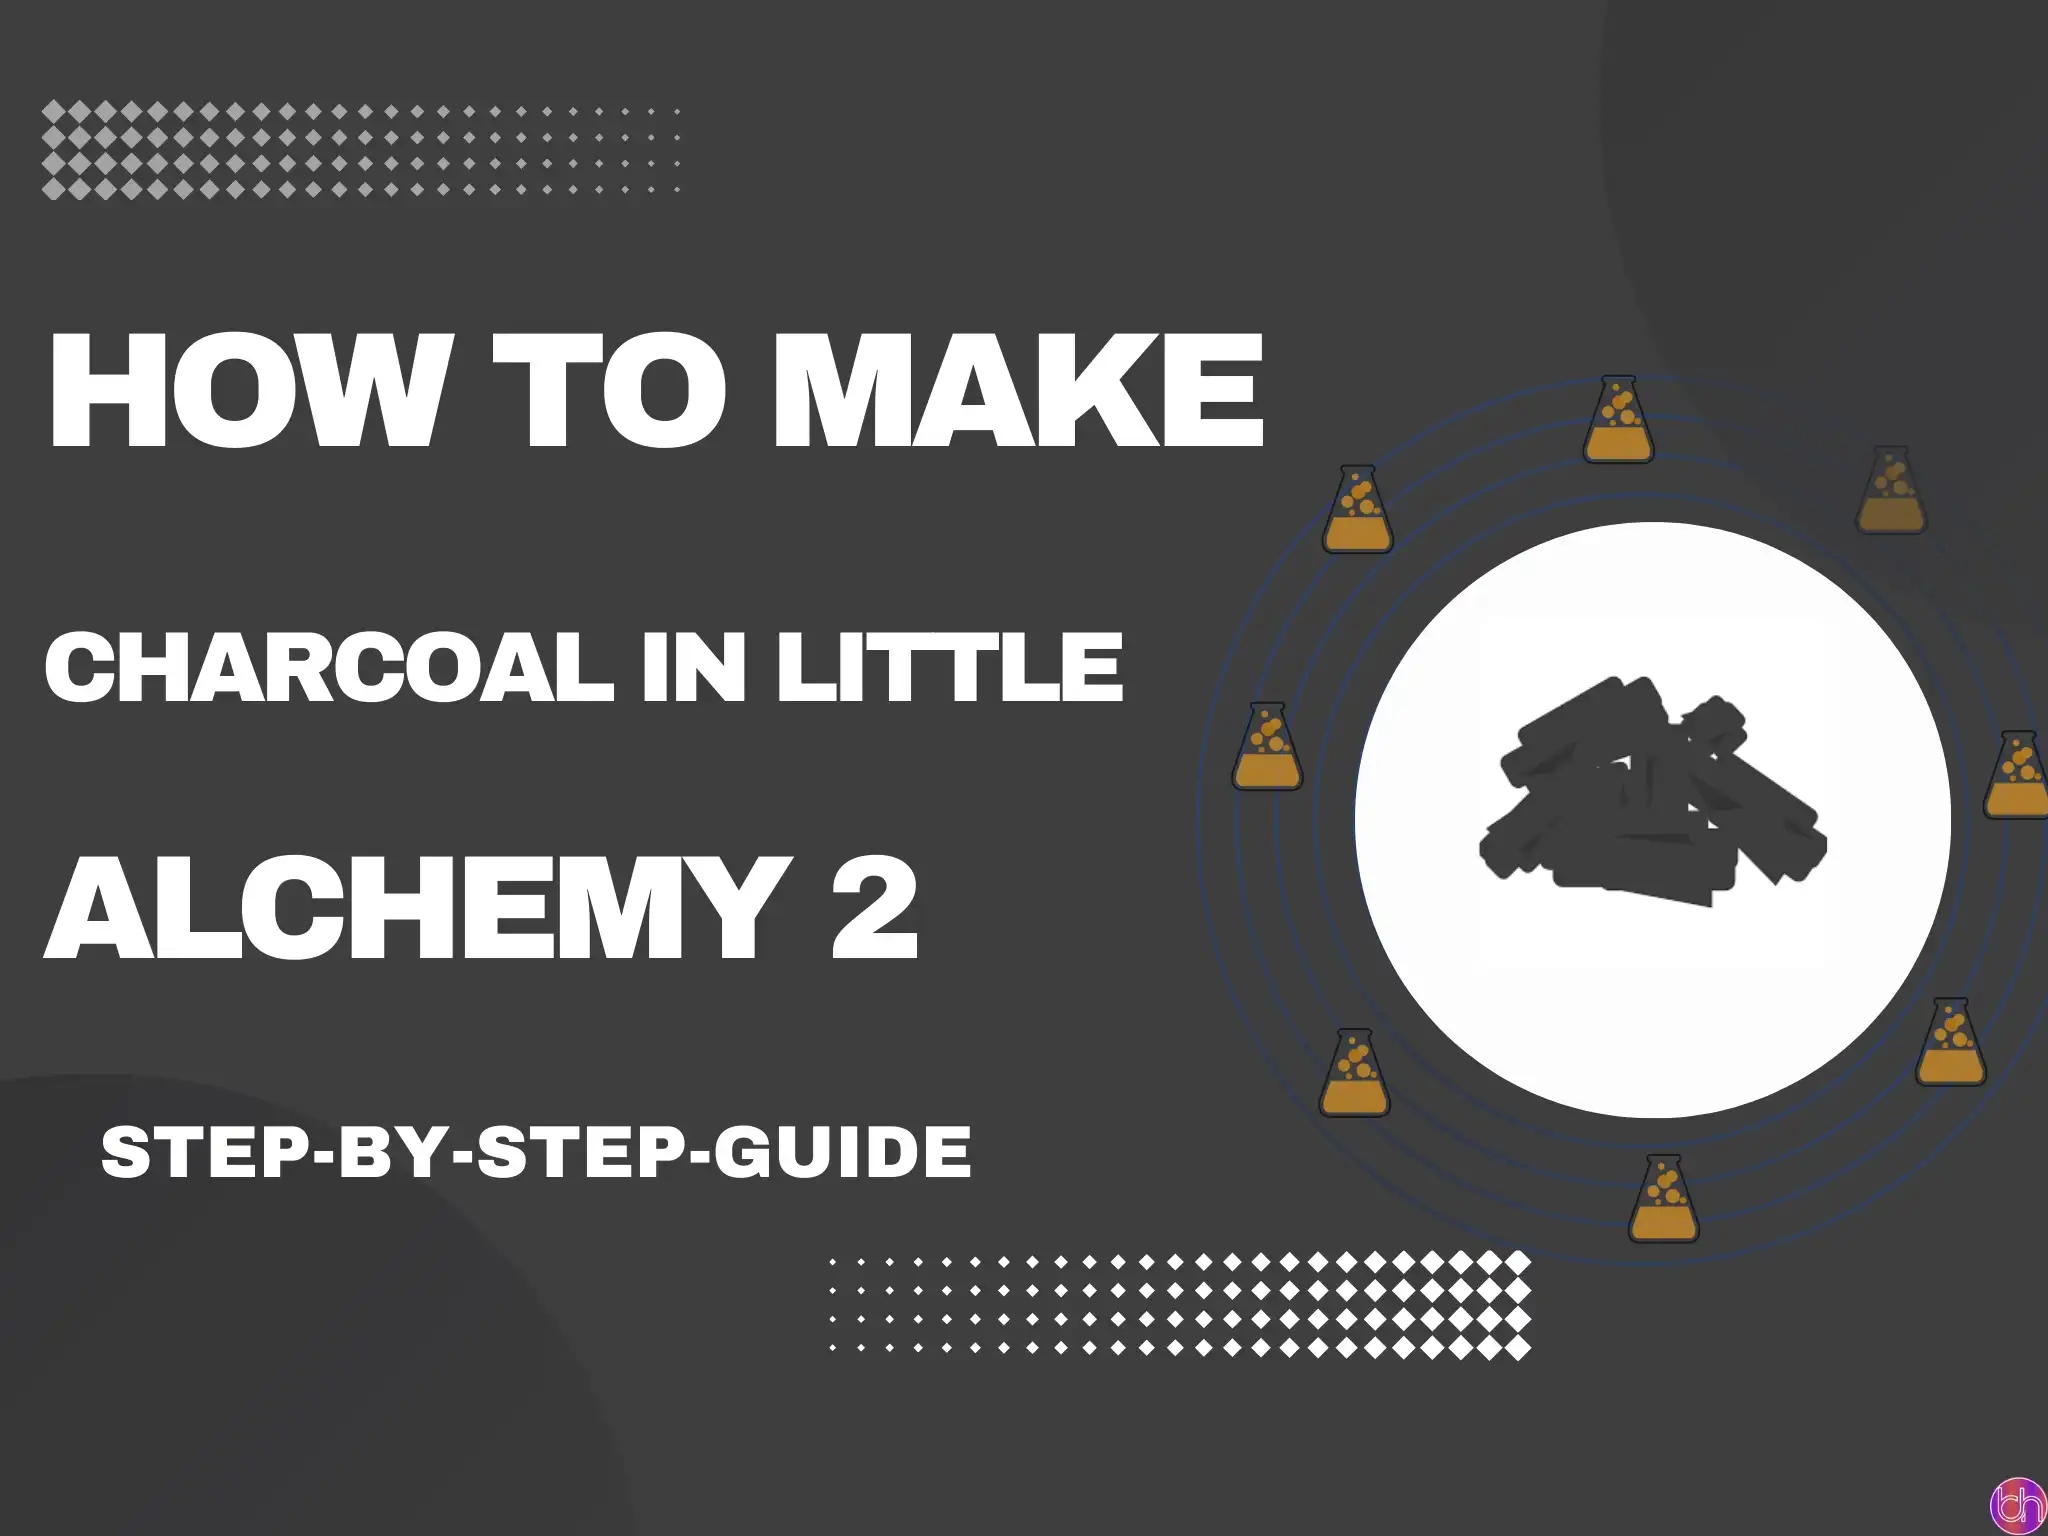 How to make Charcoal in Little Alchemy 2